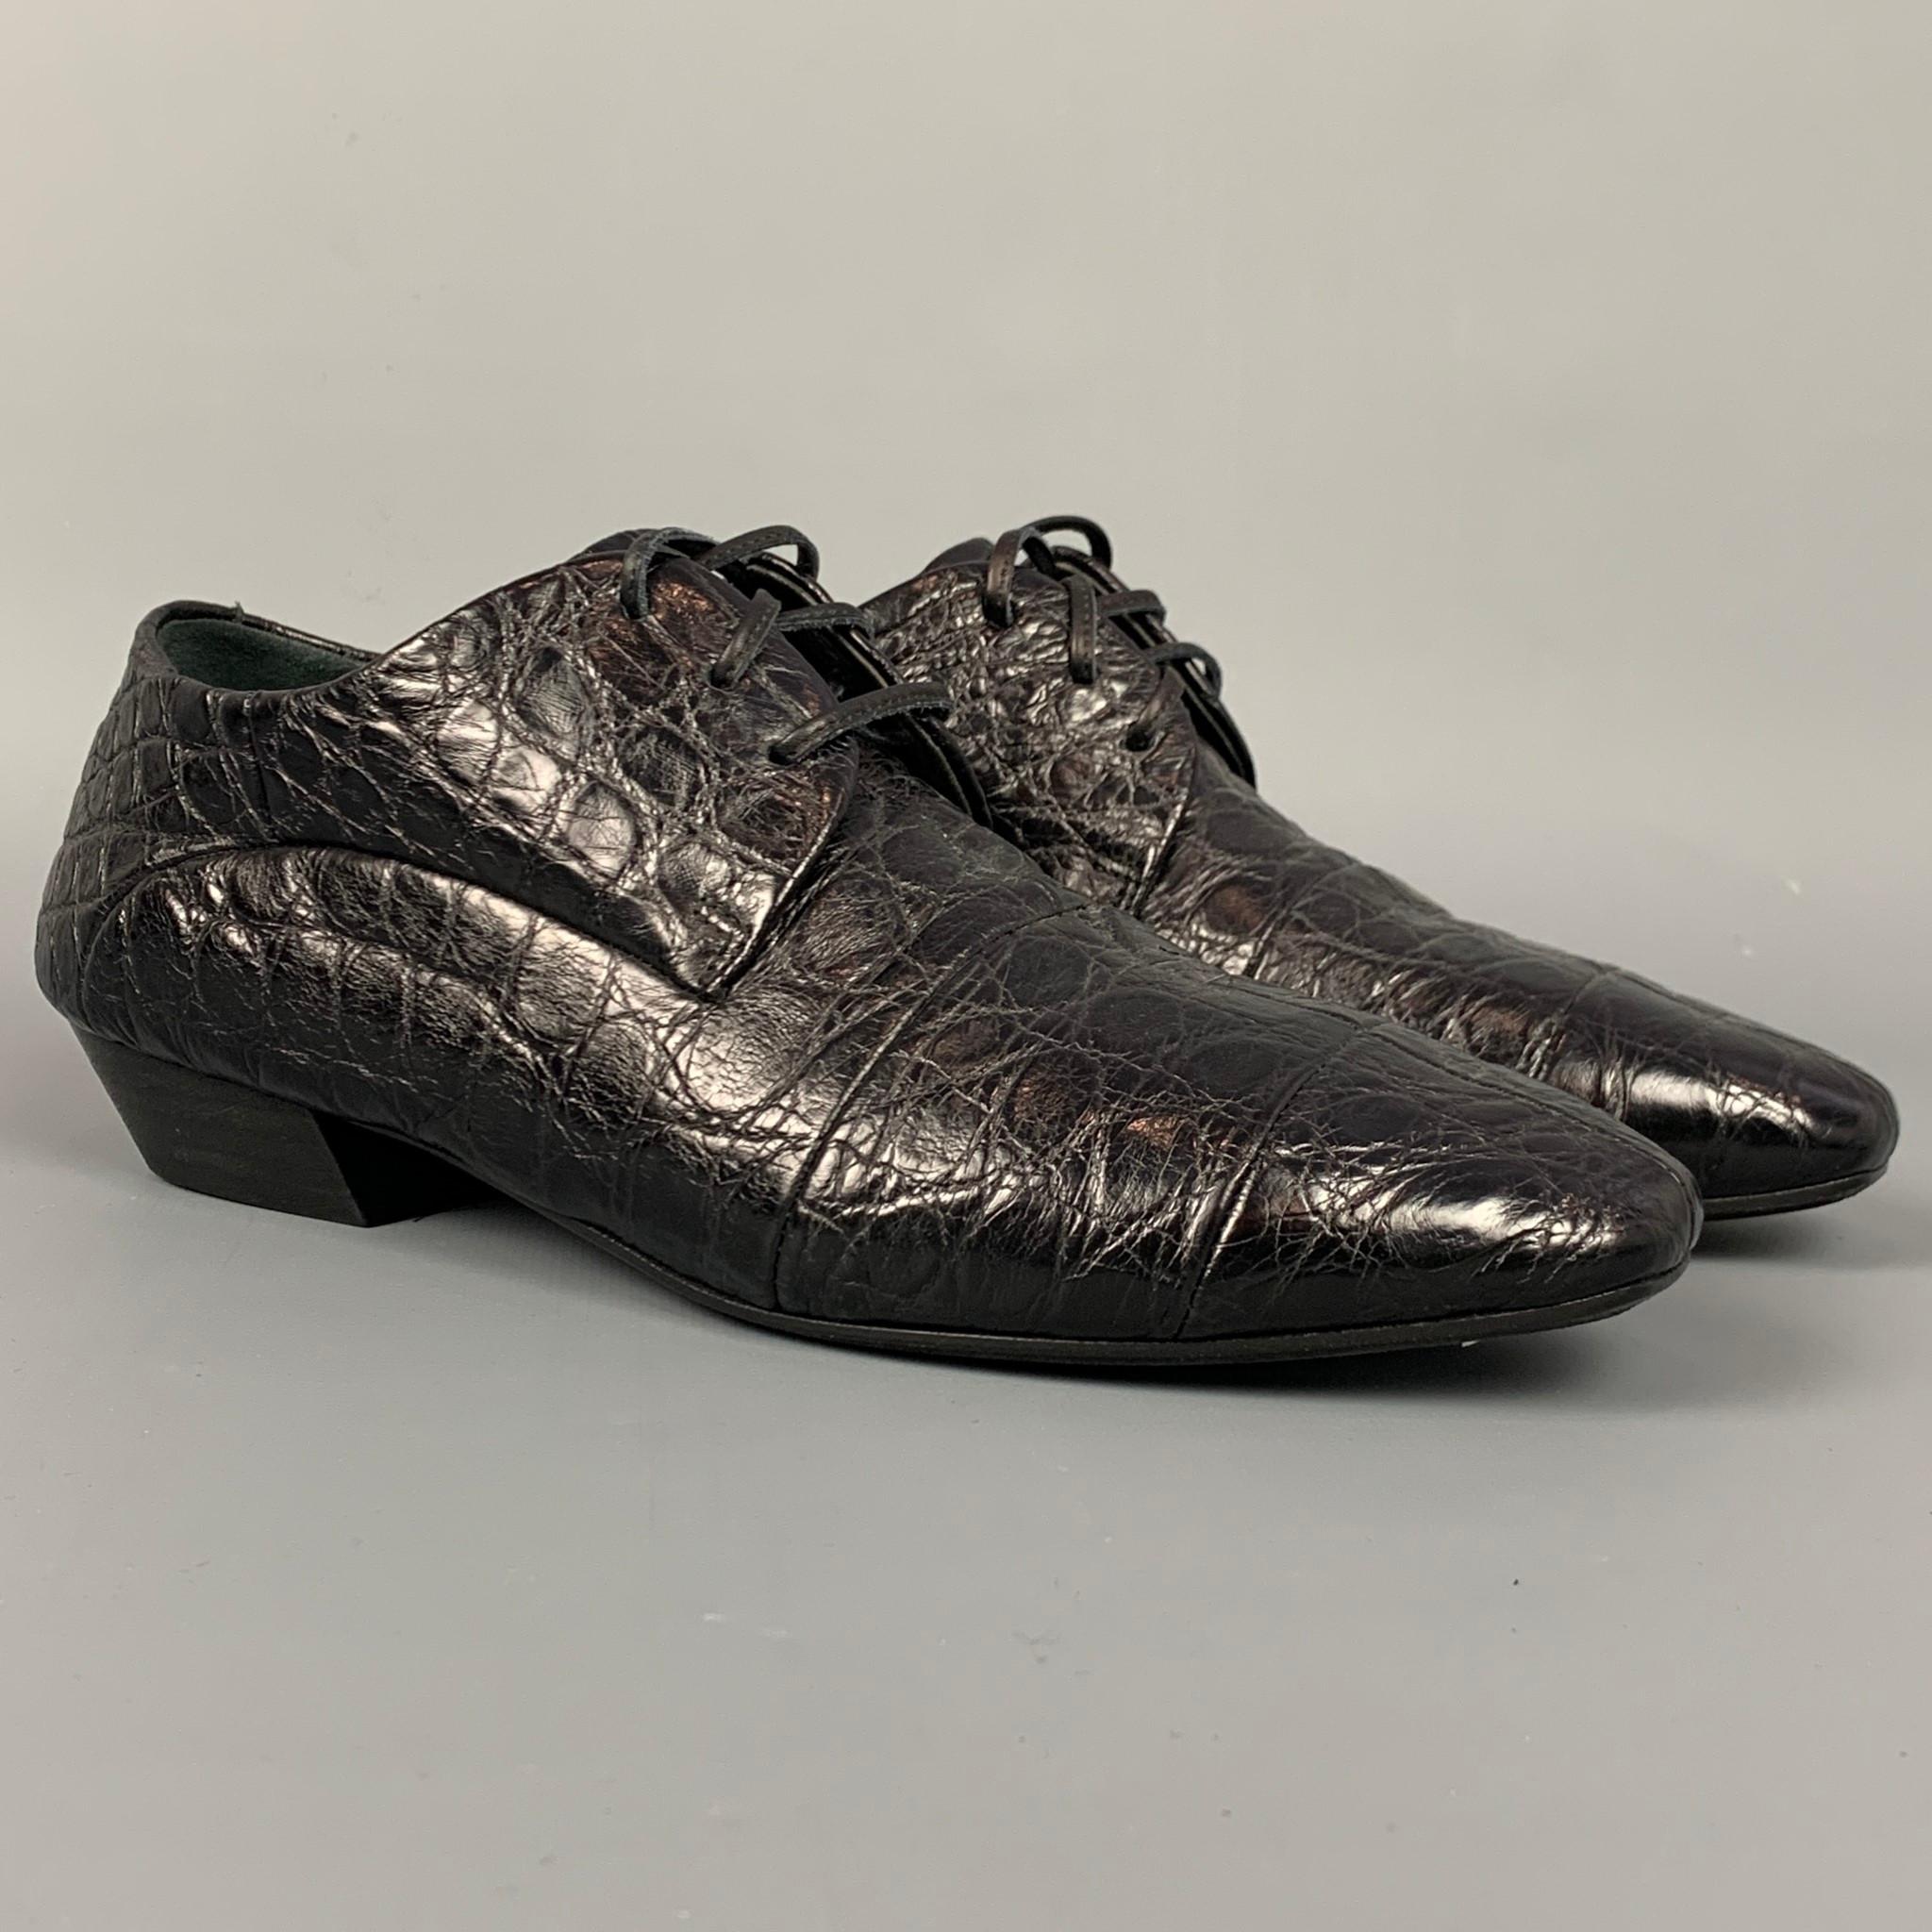 MARSELL flat laces comes in a black embossed leather featuring a square toe, wooden sole, and a lace up closure. Made in Italy. 

Very Good Pre-Owned Condition.
Marked: 37

Outsole: 3 in. x 9 in. 